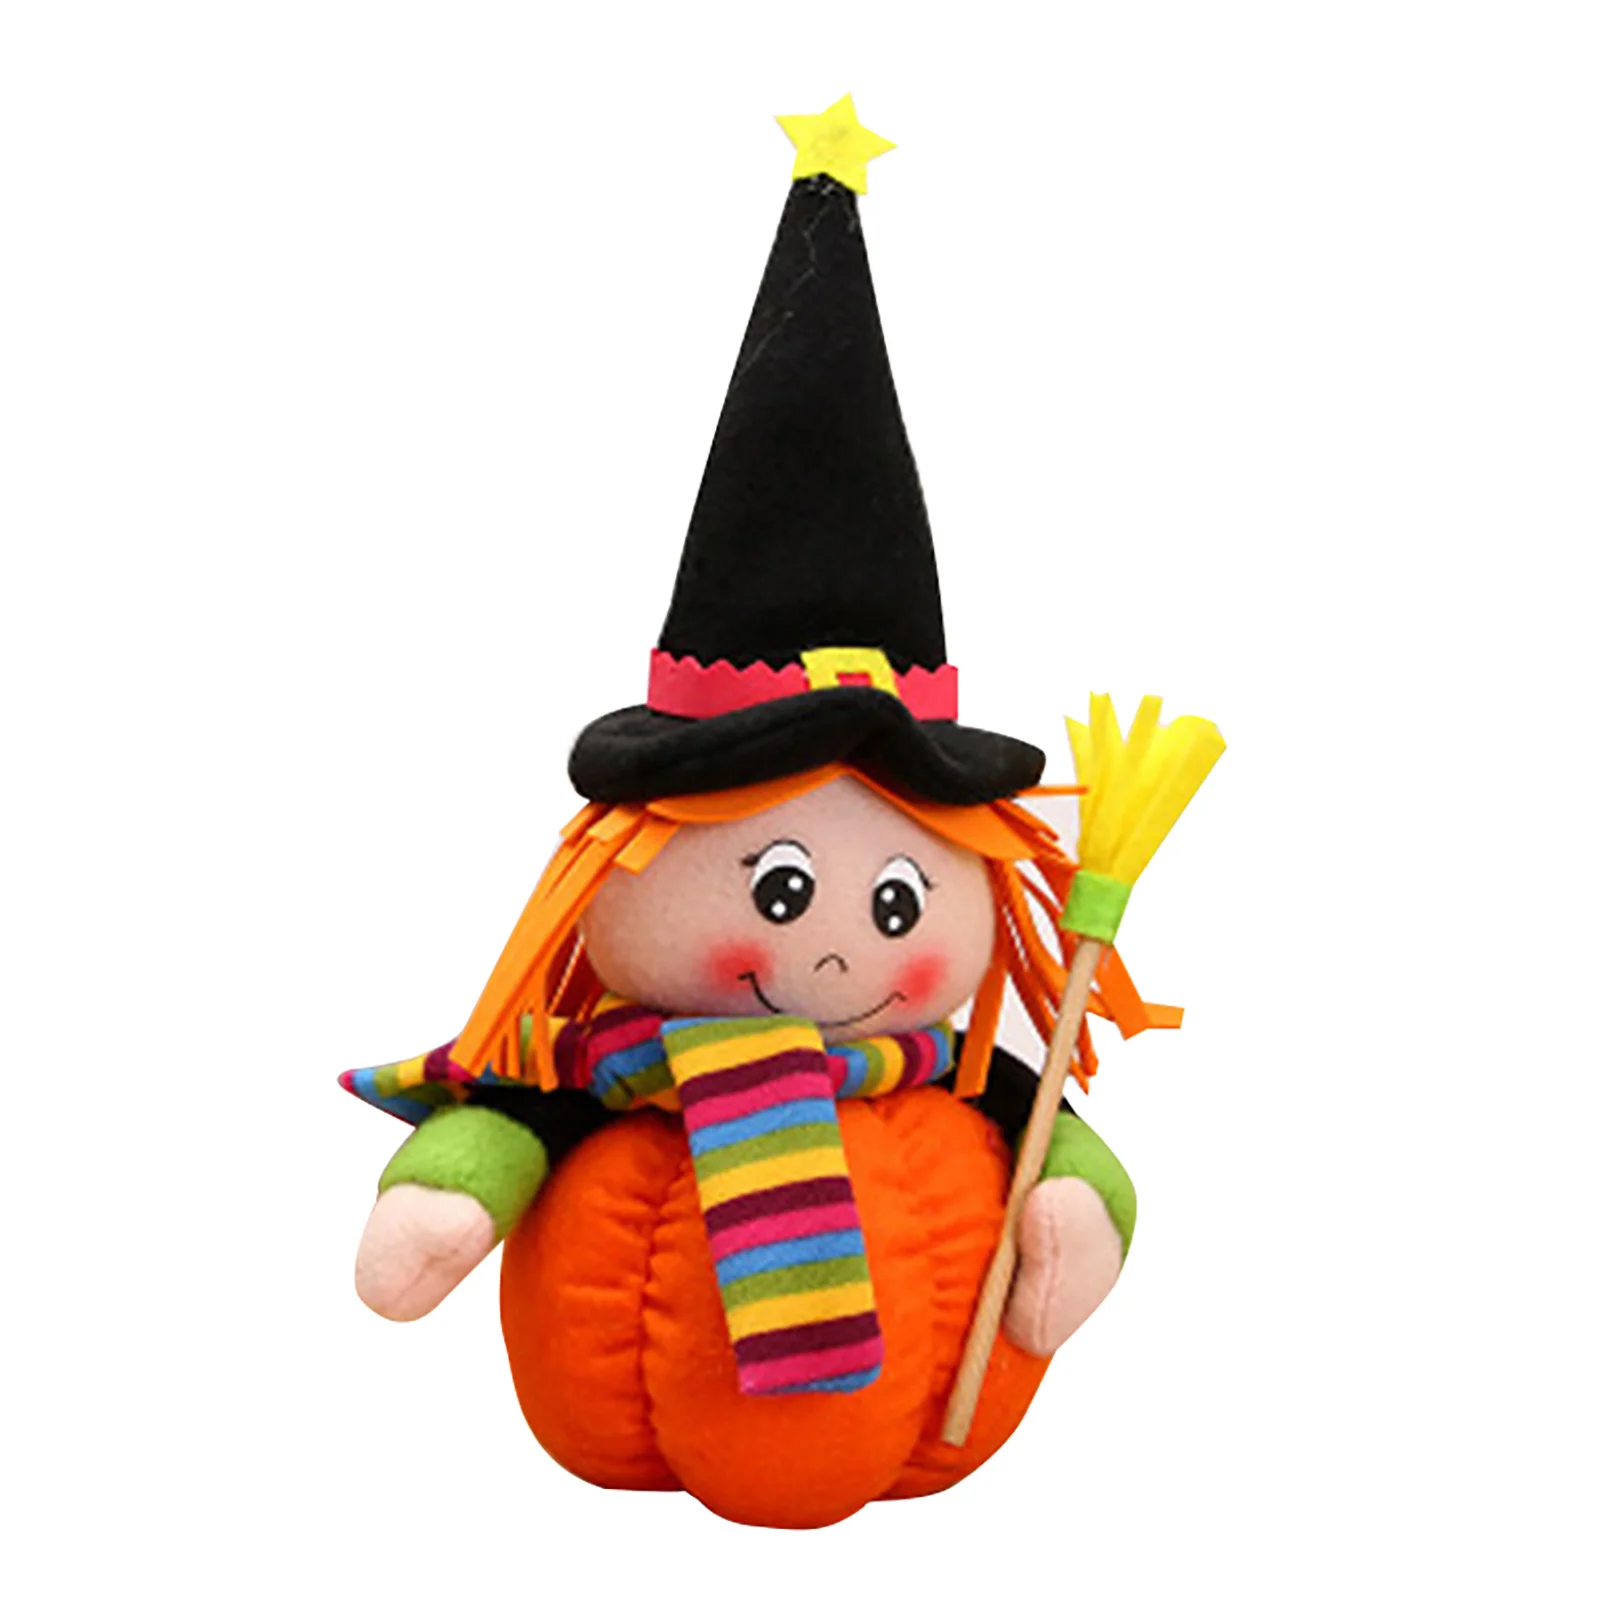 Halloween Plush Toys Soft Cute And Naughty Stuffed Doll Pumpkin Little Witch For Home Garden Decor Ornaments